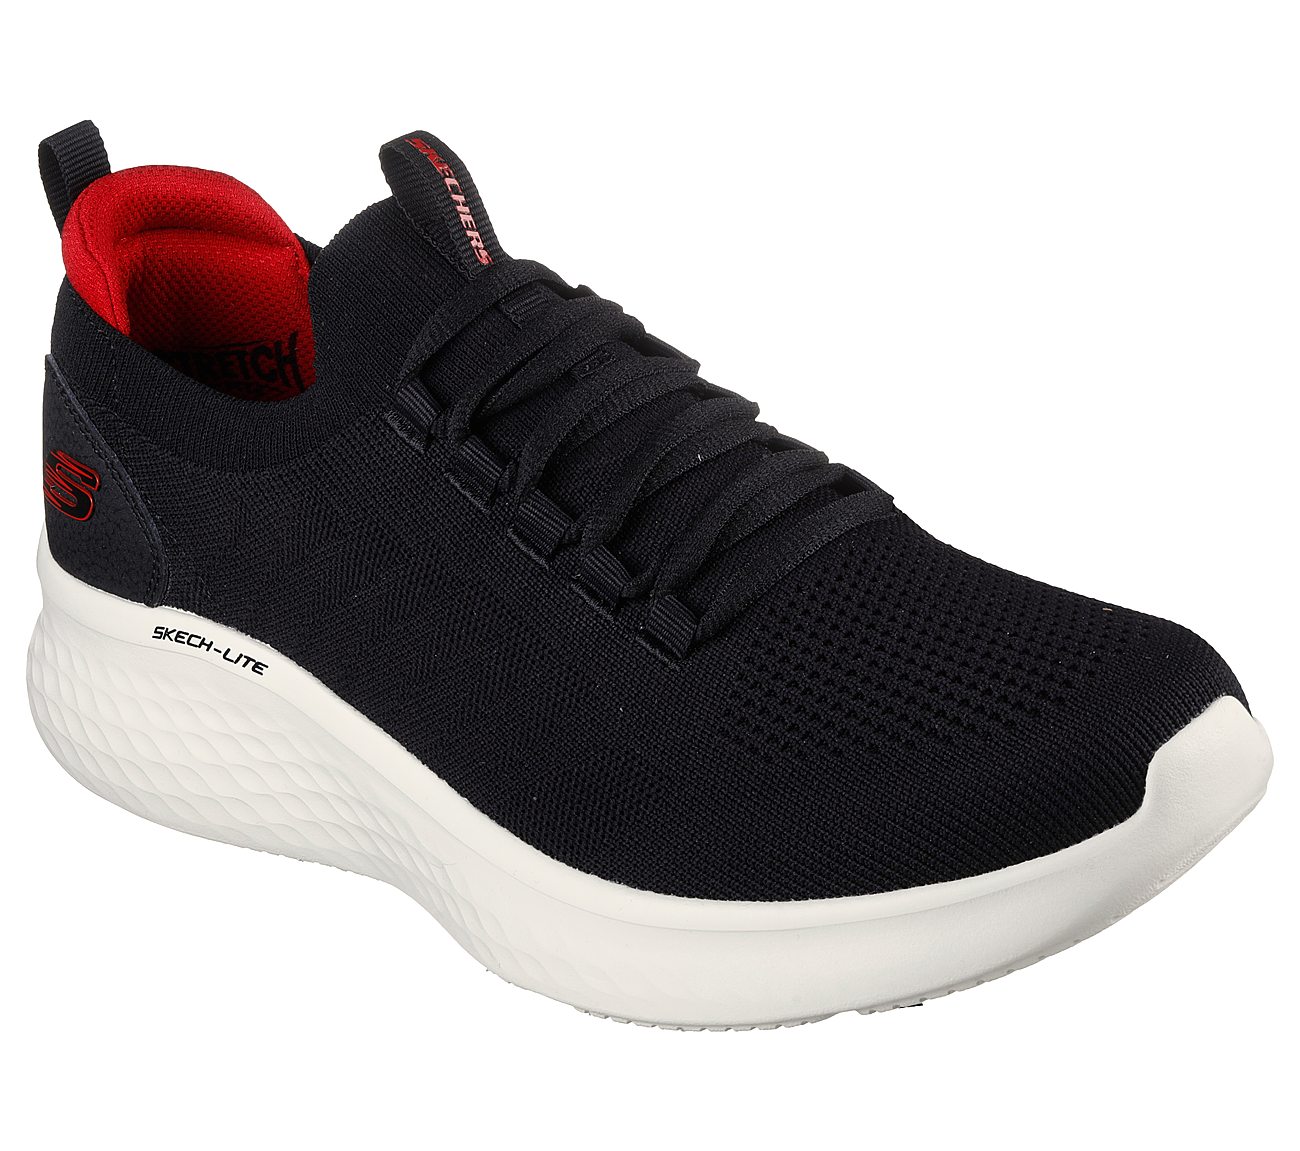 SKECH-LITE PRO - FAINT FLAIR, BLACK/RED Footwear Right View